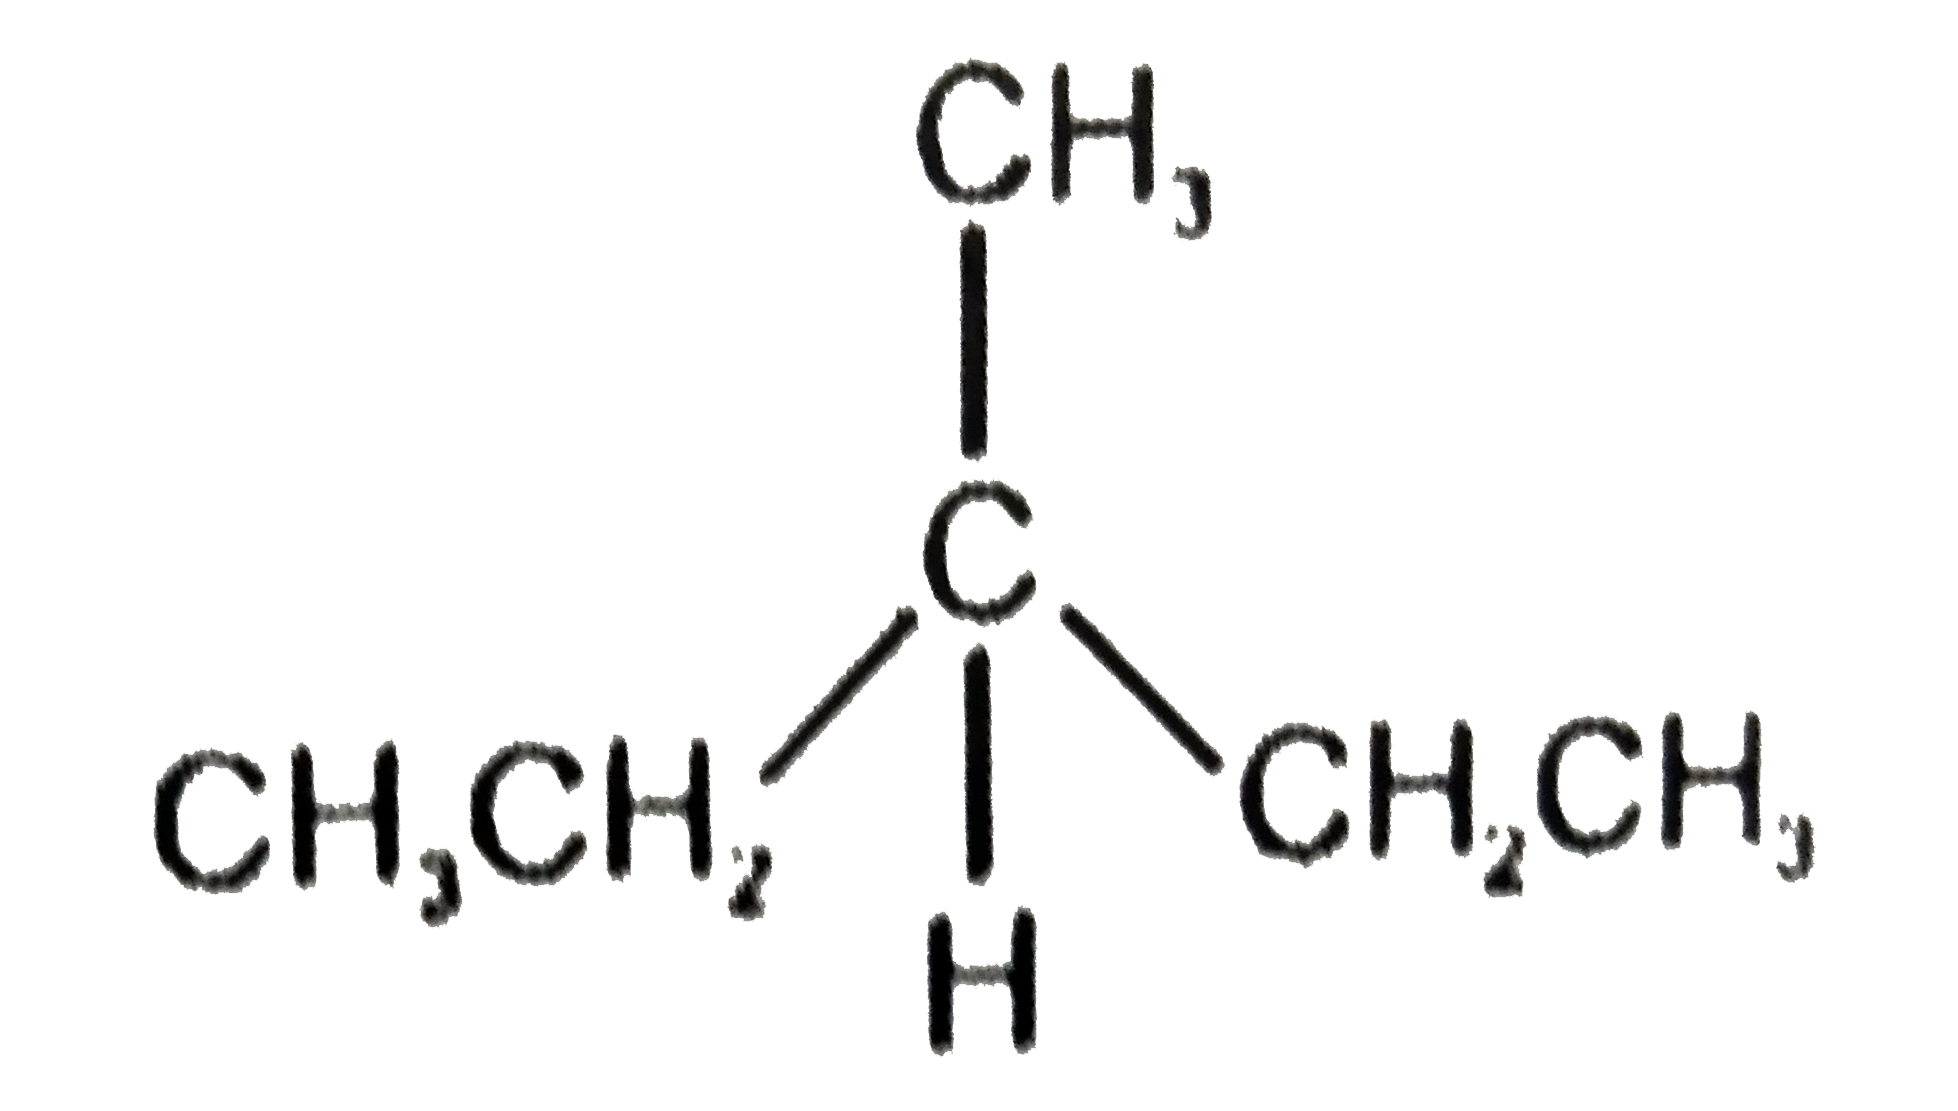 The maximum number of isomers (including stereoisomers ) that are possible on monochlorination of the following compound is :